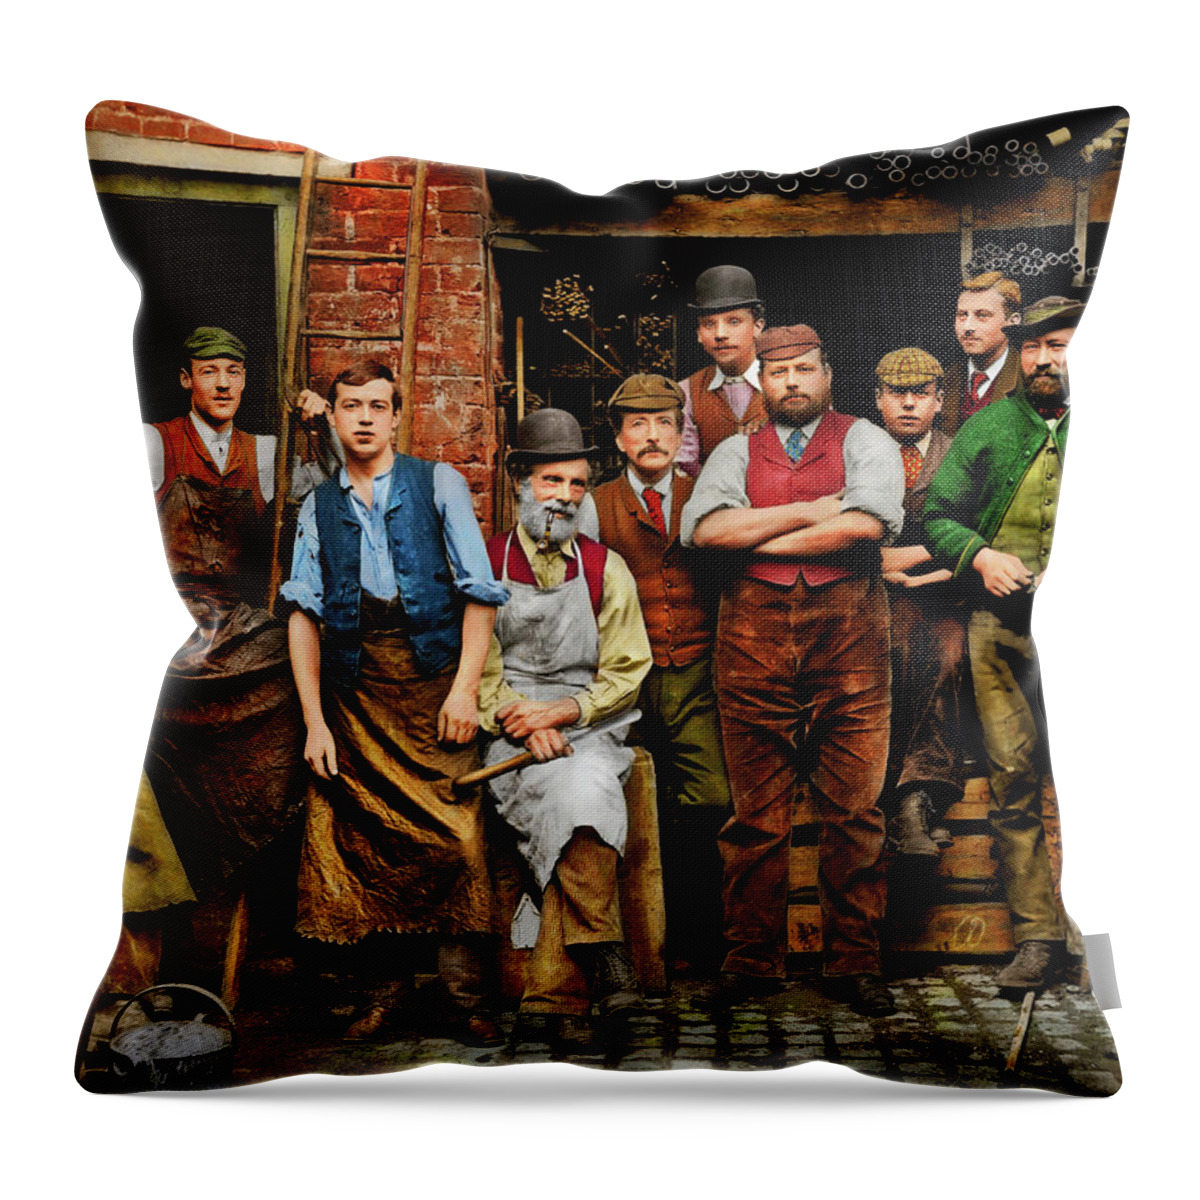 United Kingdom Throw Pillow featuring the photograph Blacksmith - The Ironmongers of Maidenhead 1900 by Mike Savad